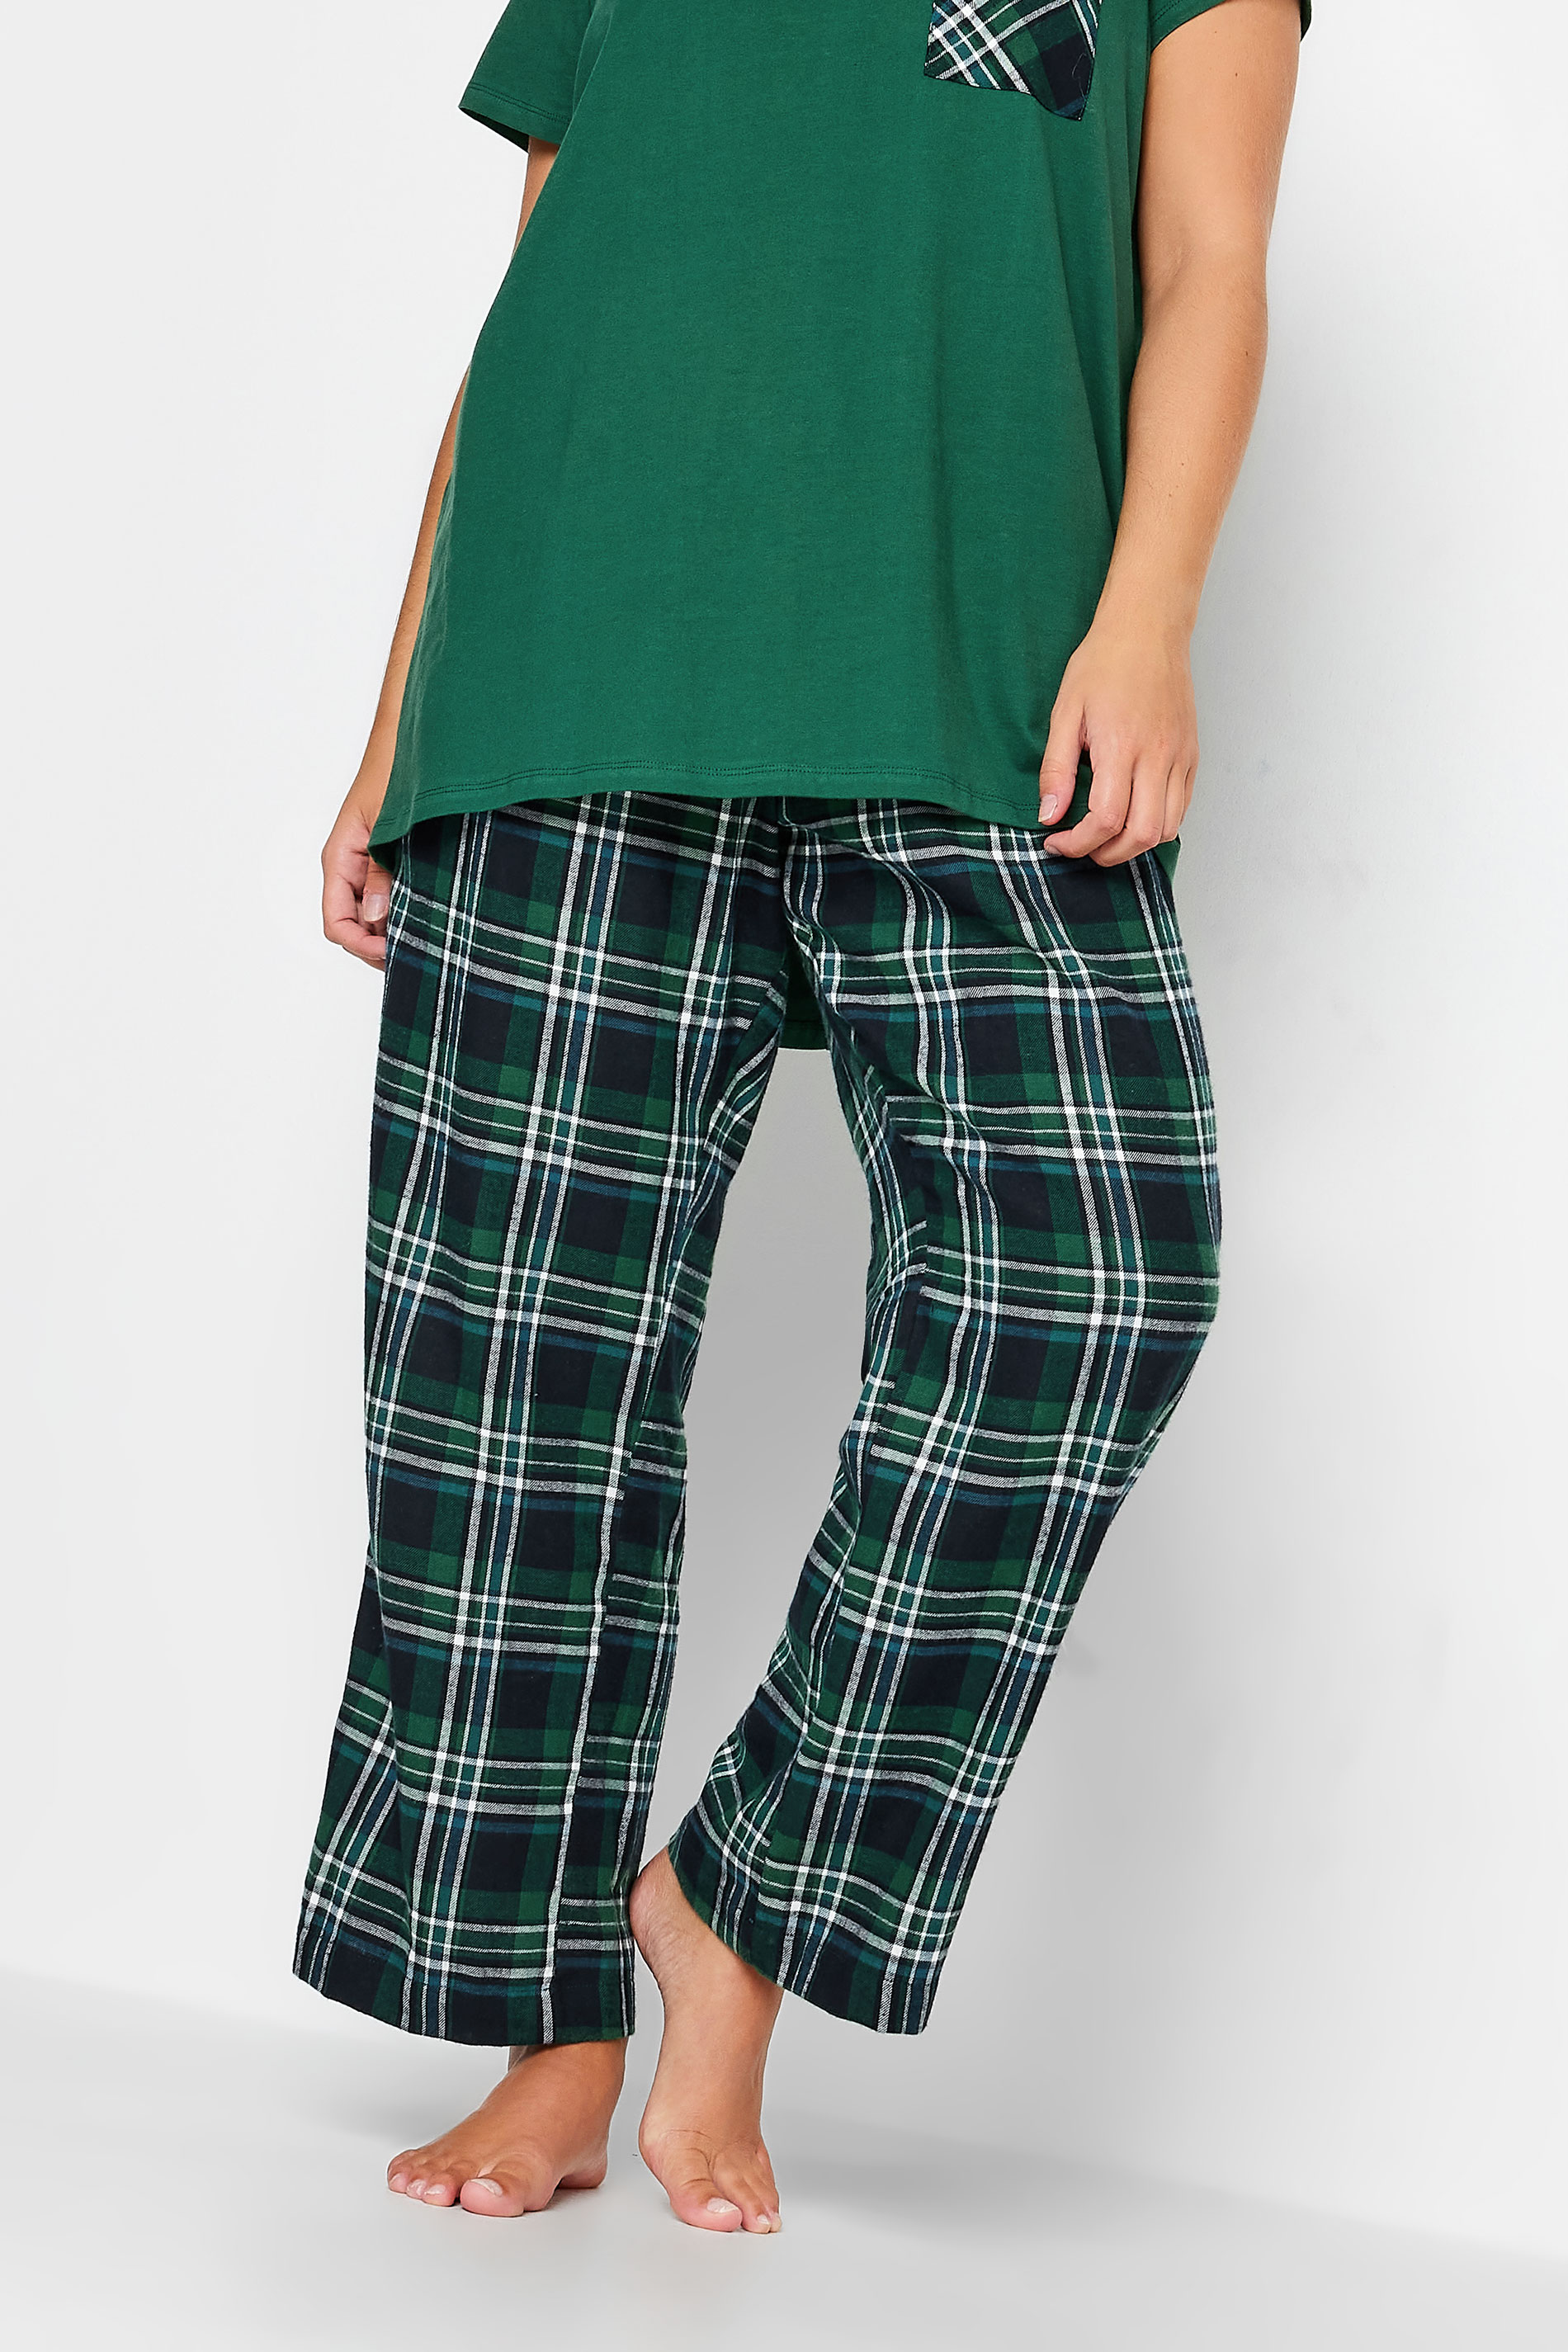 LIMITED COLLECTION Plus Size Green Tartan Check Pyjama Bottoms | Yours Clothing 2